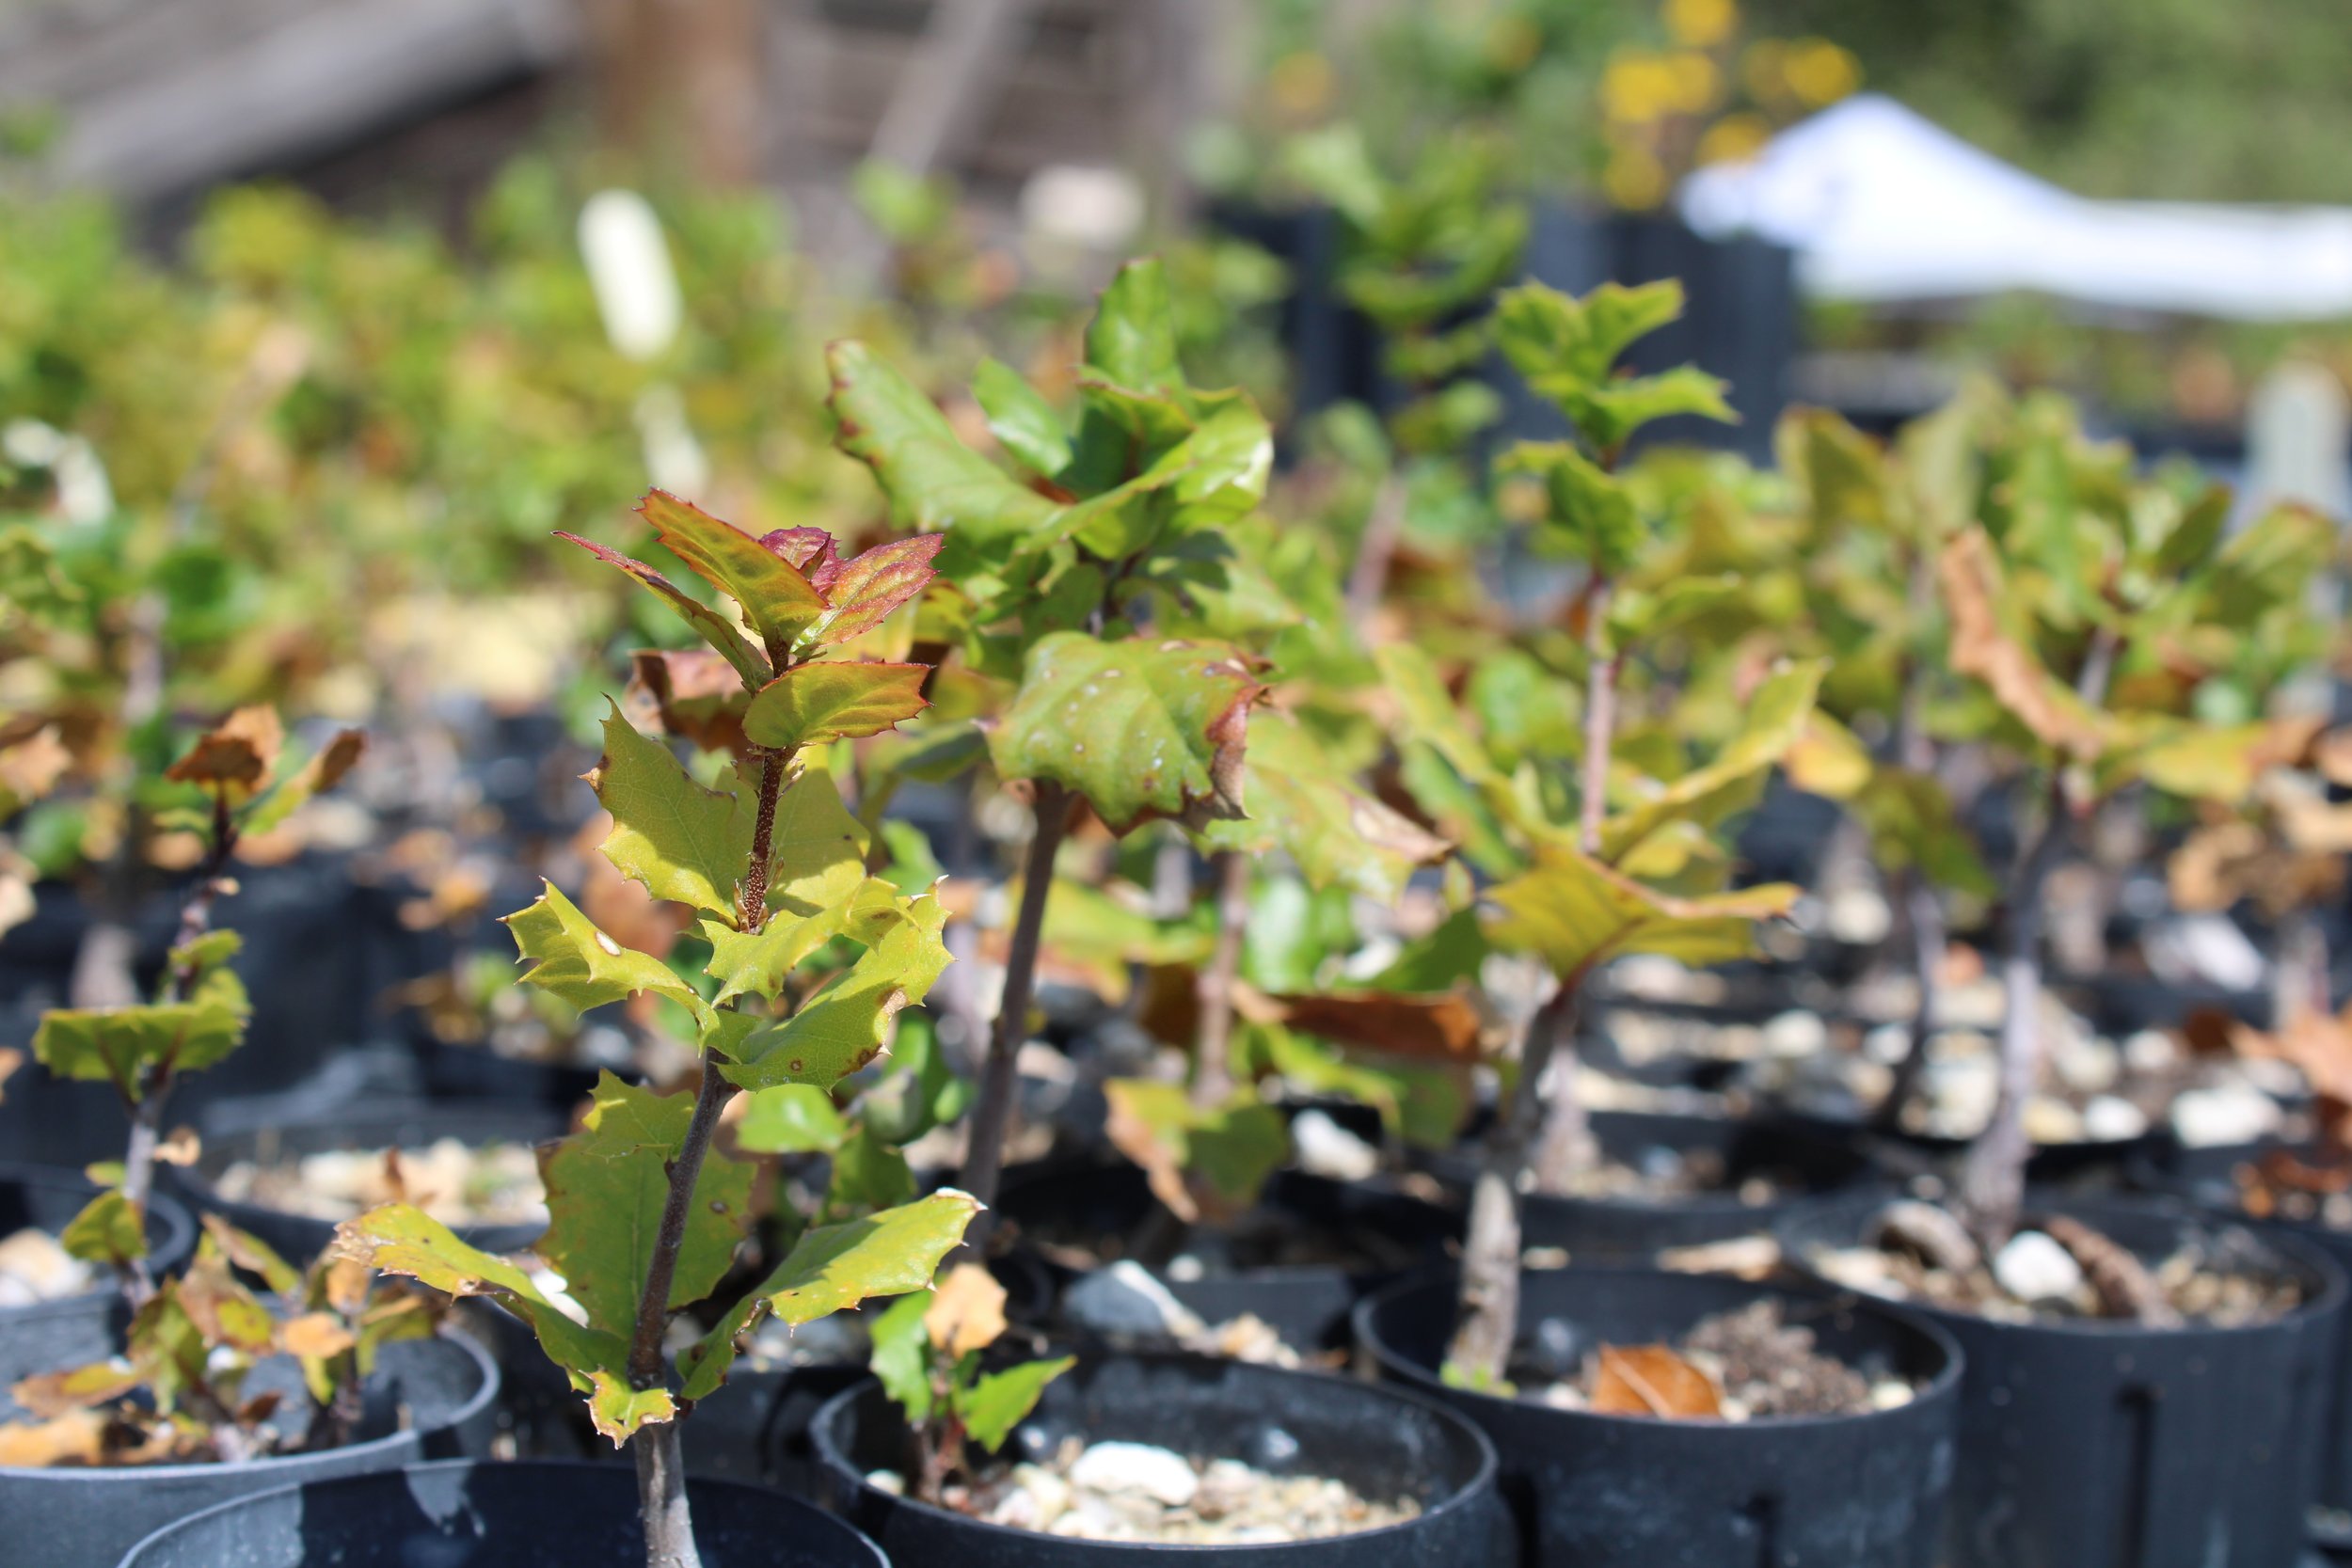 Native Plant Nurseries and Restoration Projects